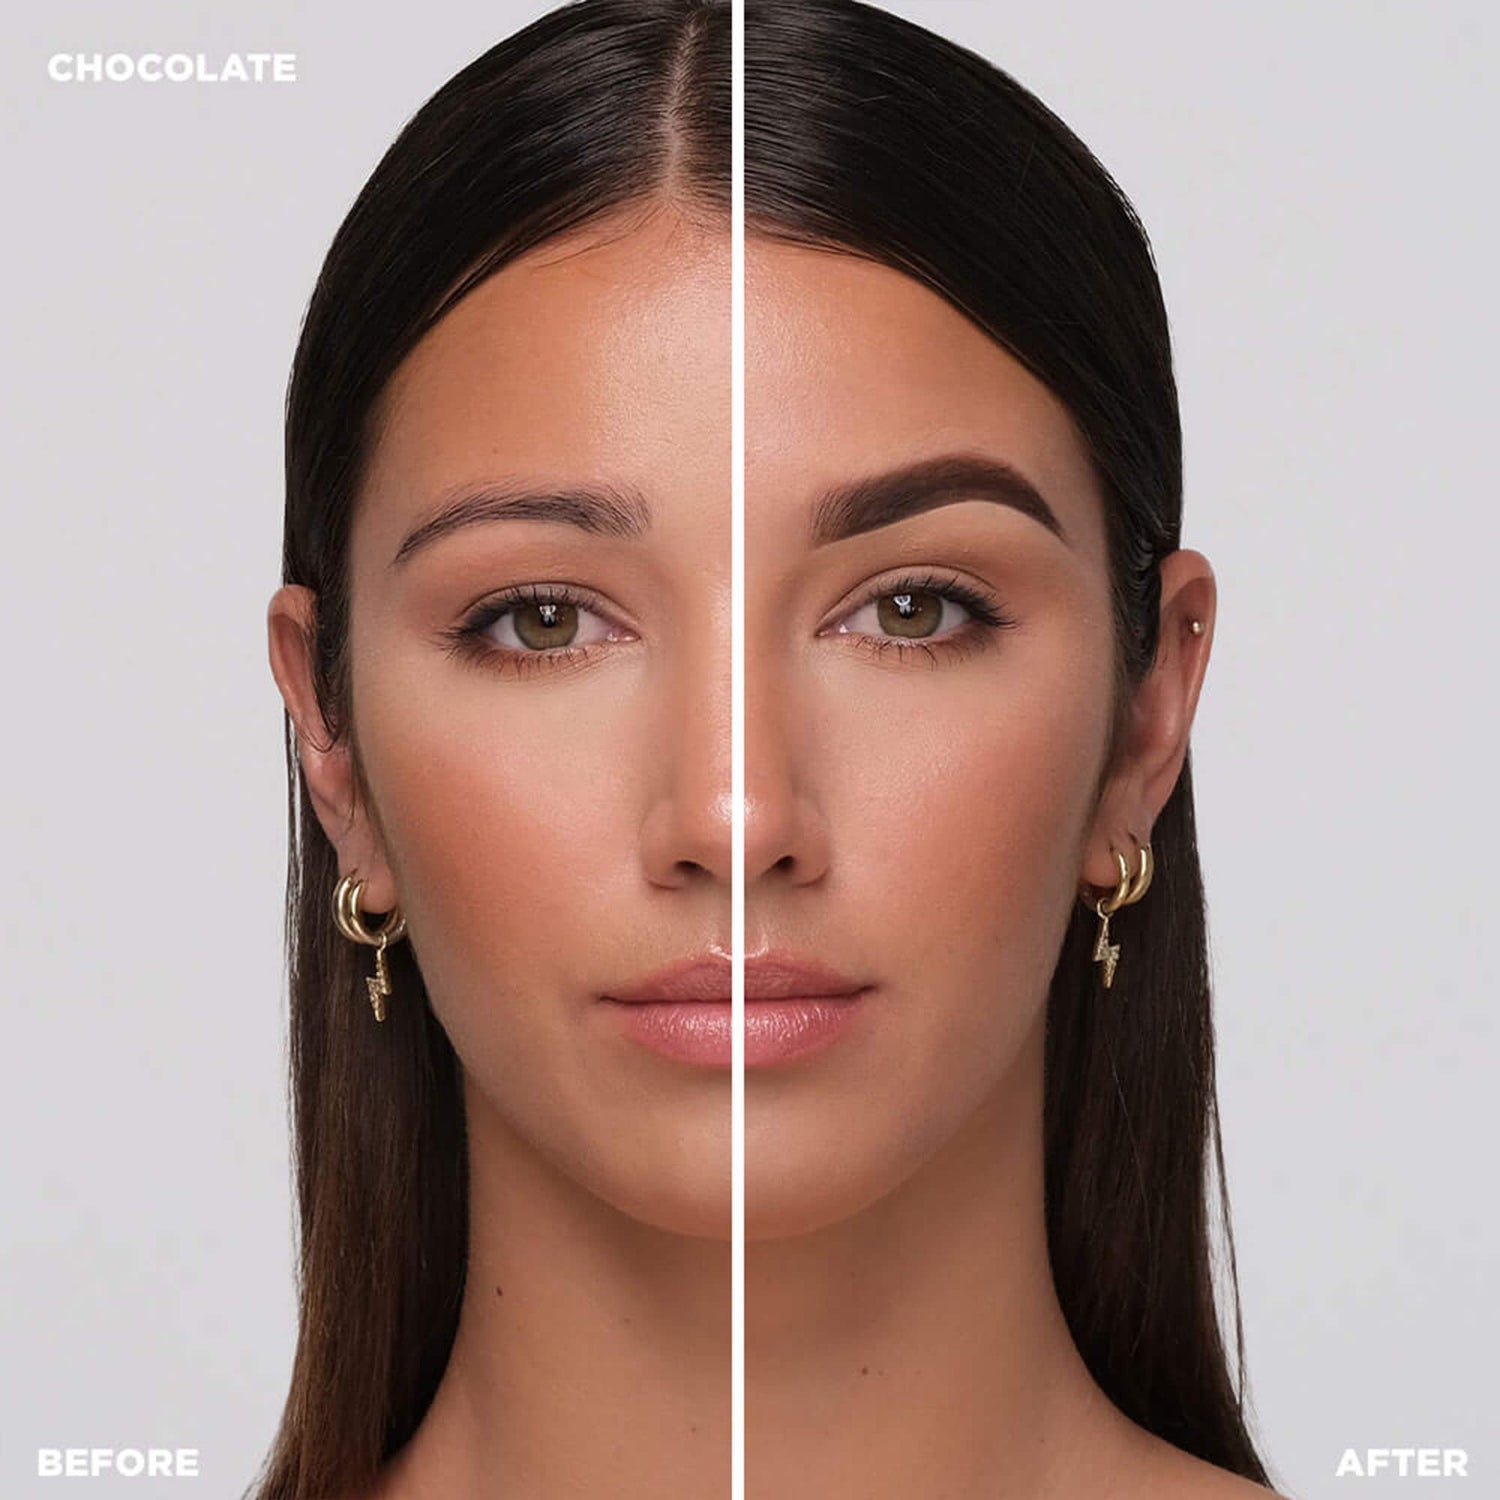 Before and after shot of model wearing Chocolate - Medium Brown